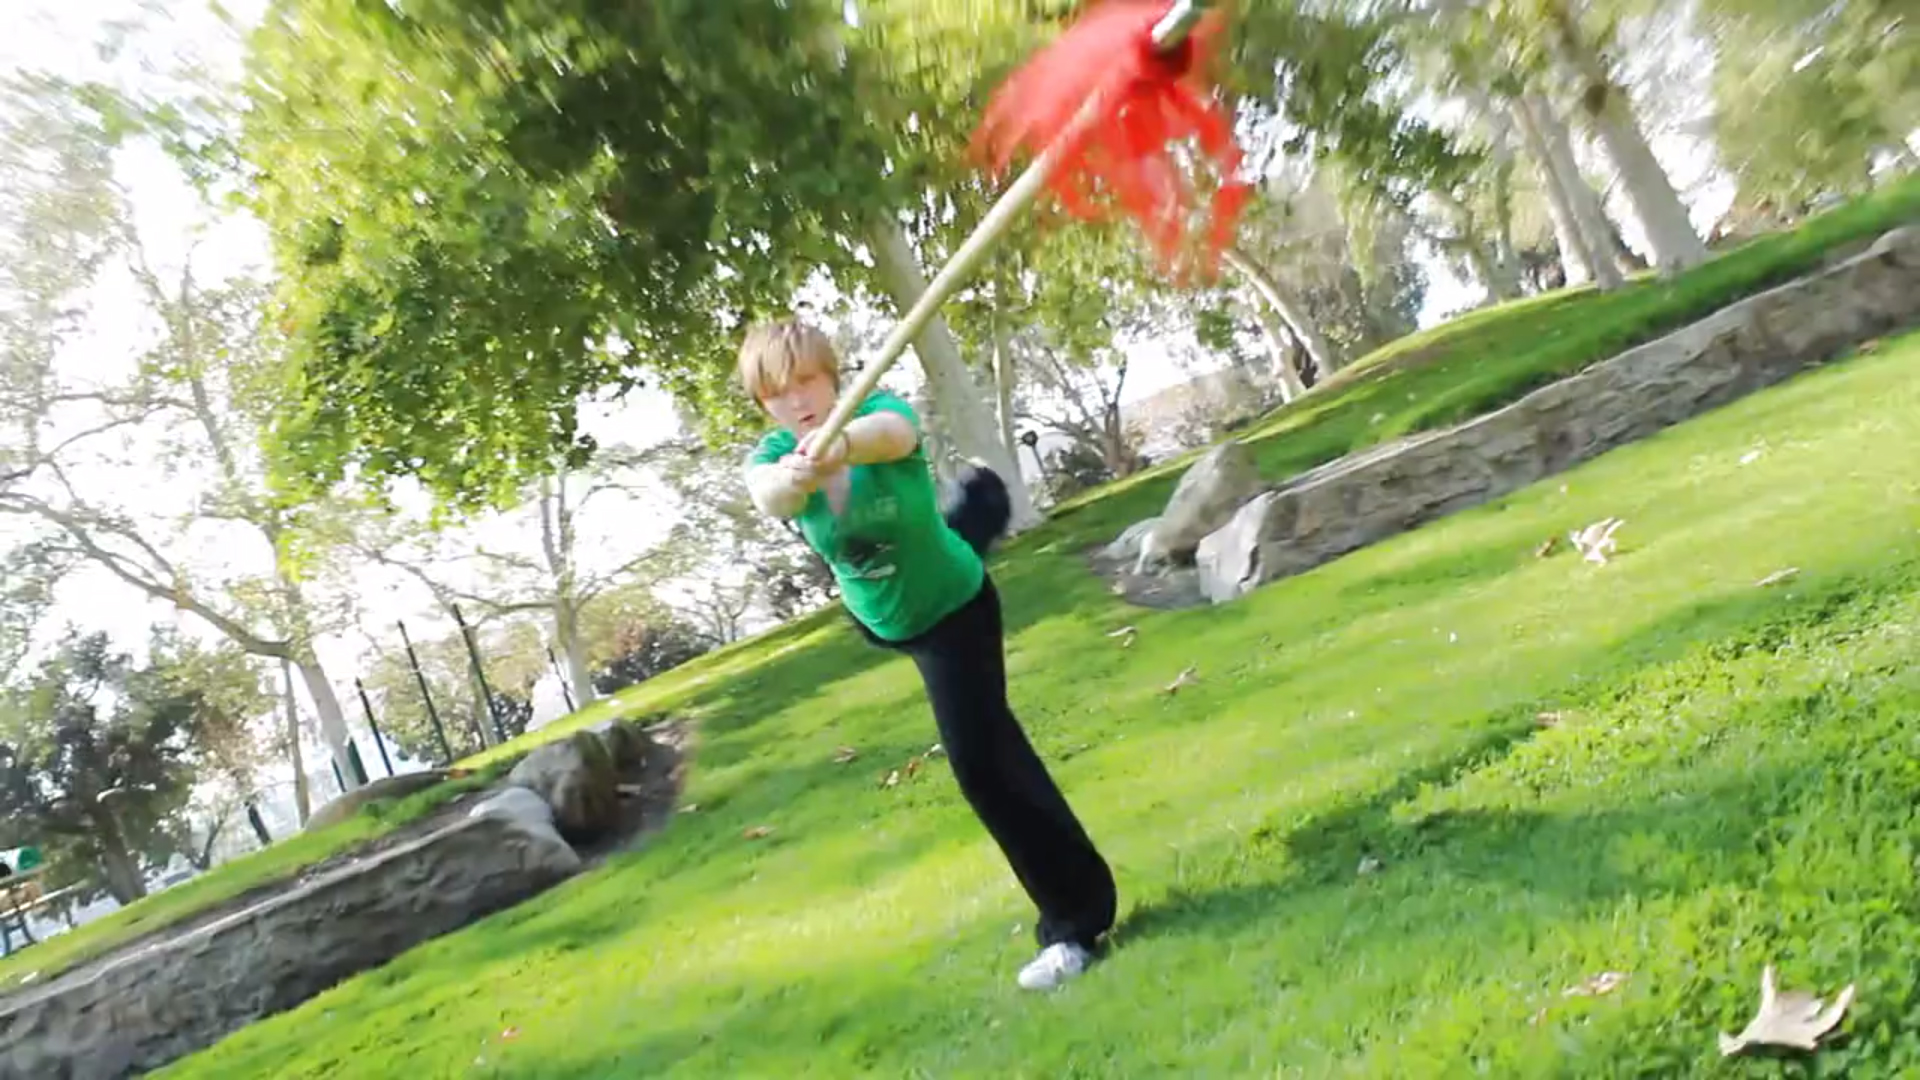 Hope LaVelle in a Northern Shaolin 10-foot spear demonstration video.